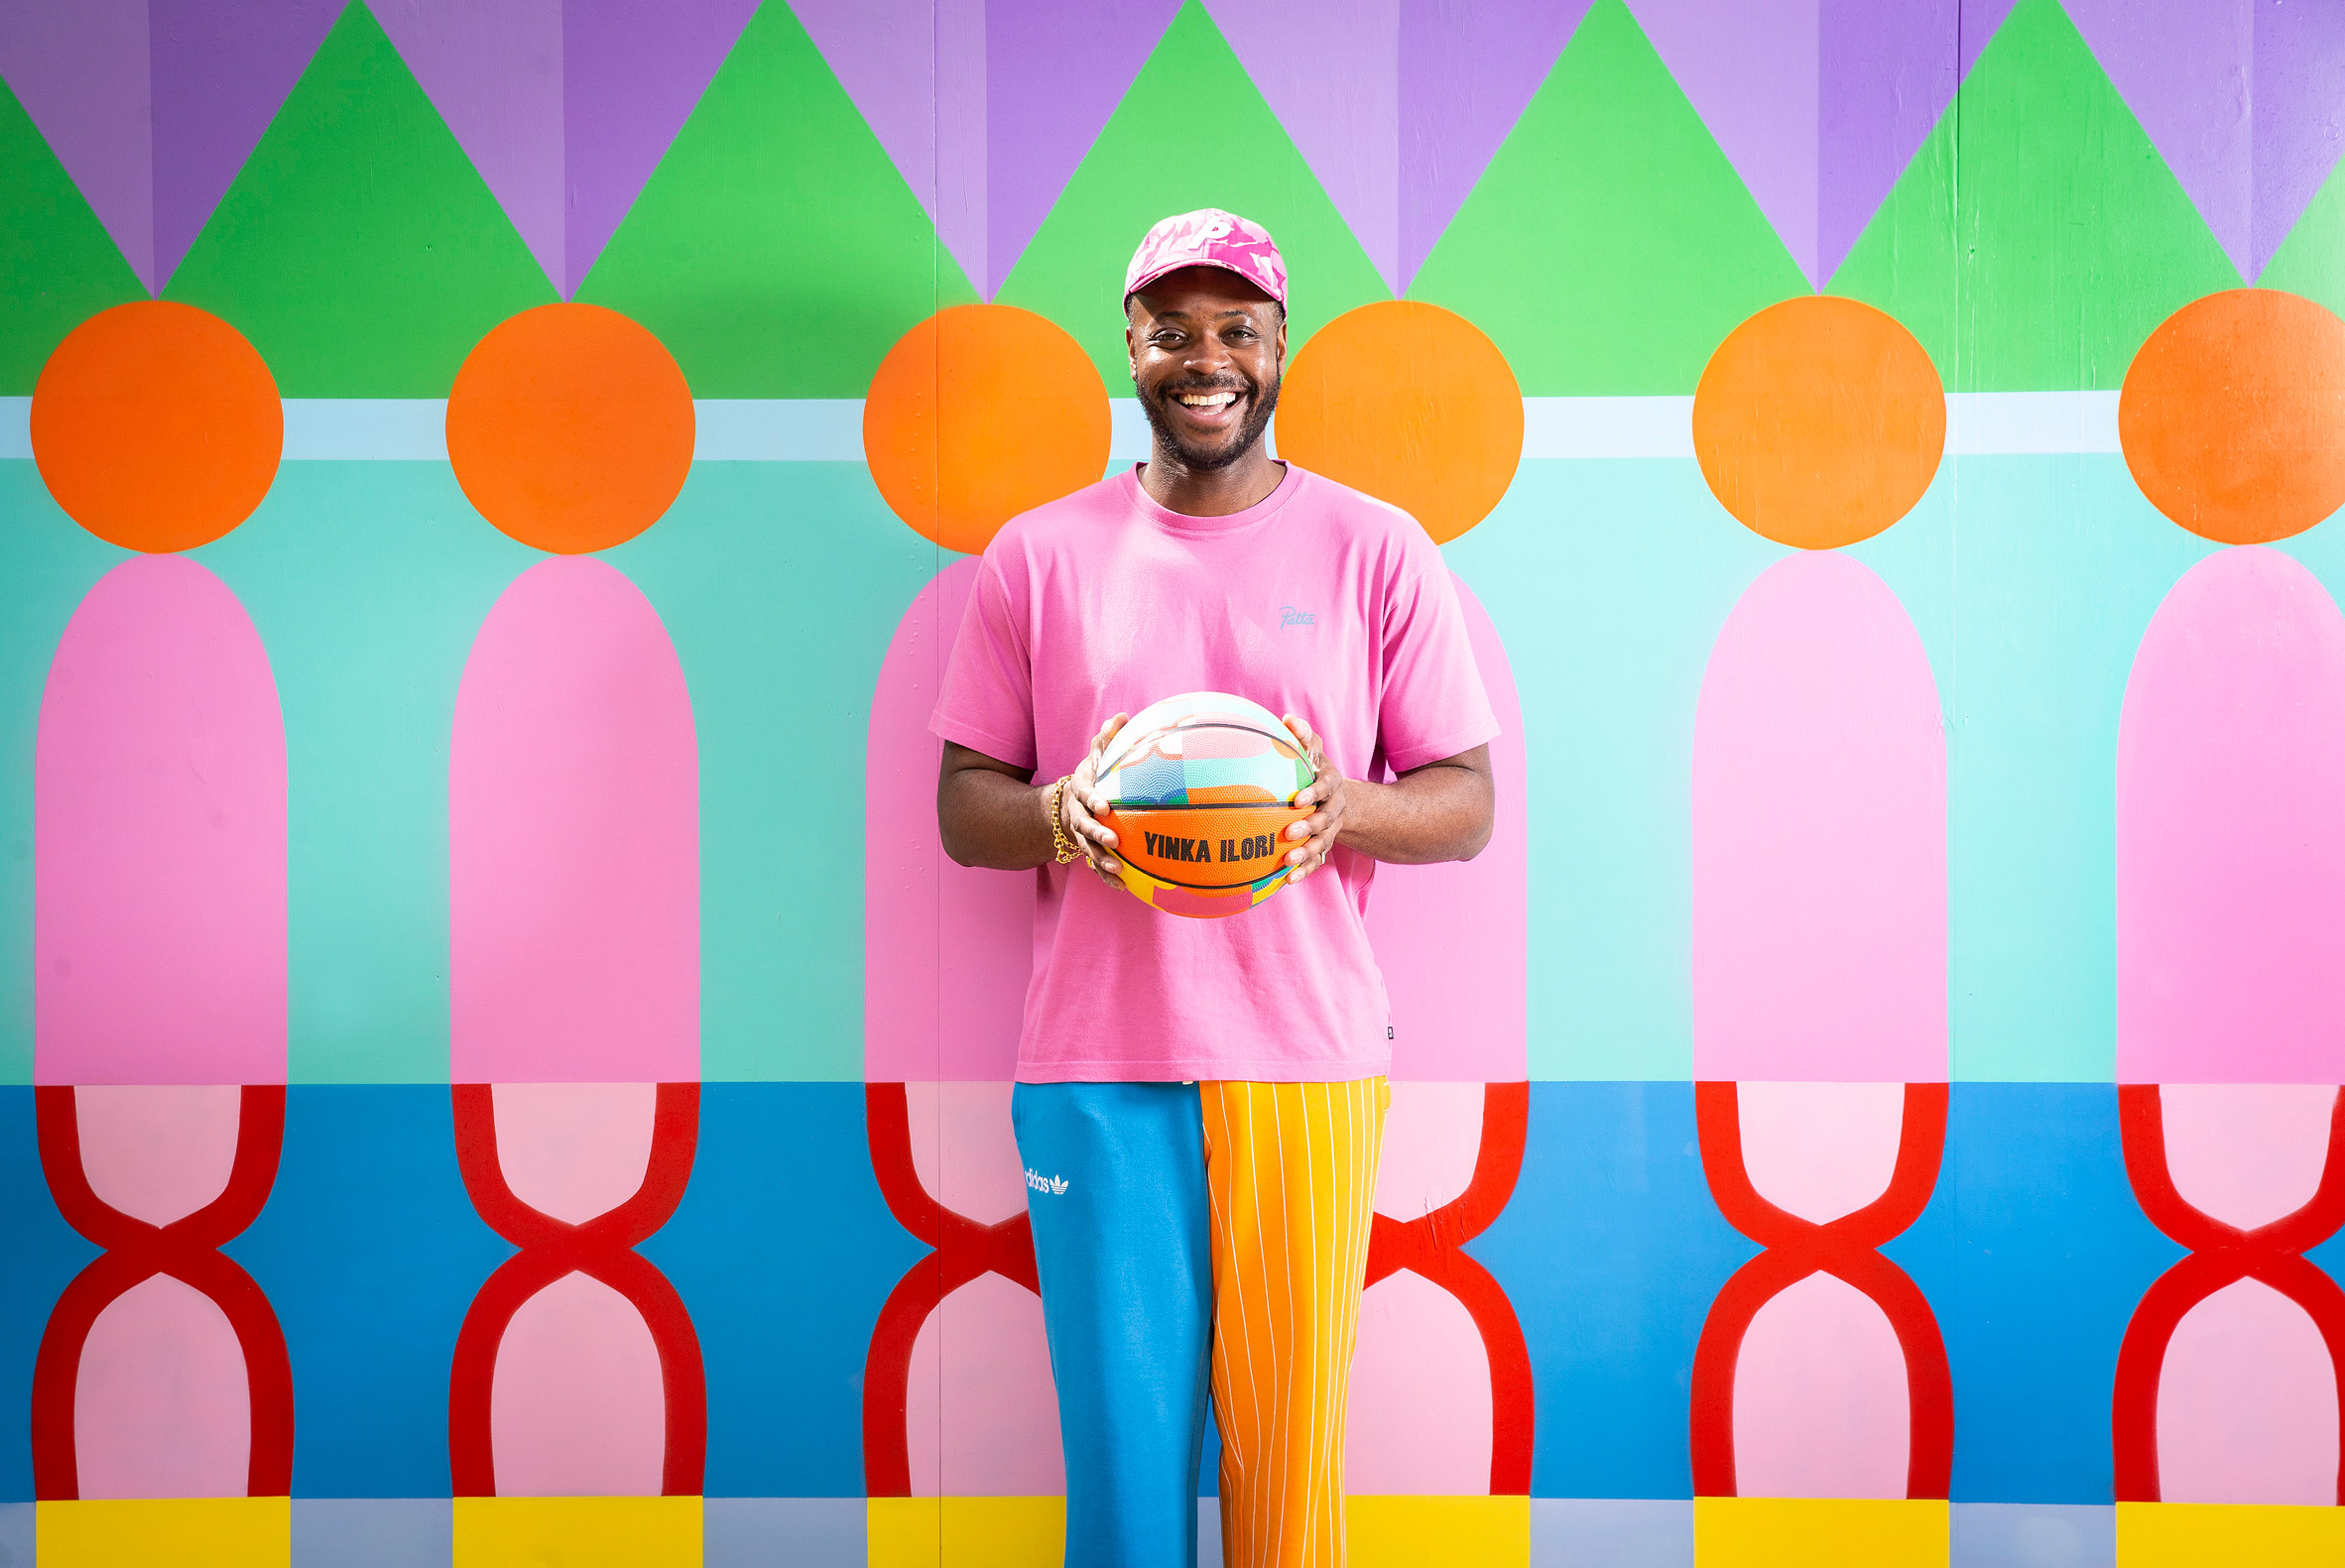 Yinka Ilori holding basketball in front of colourful printed hoarding